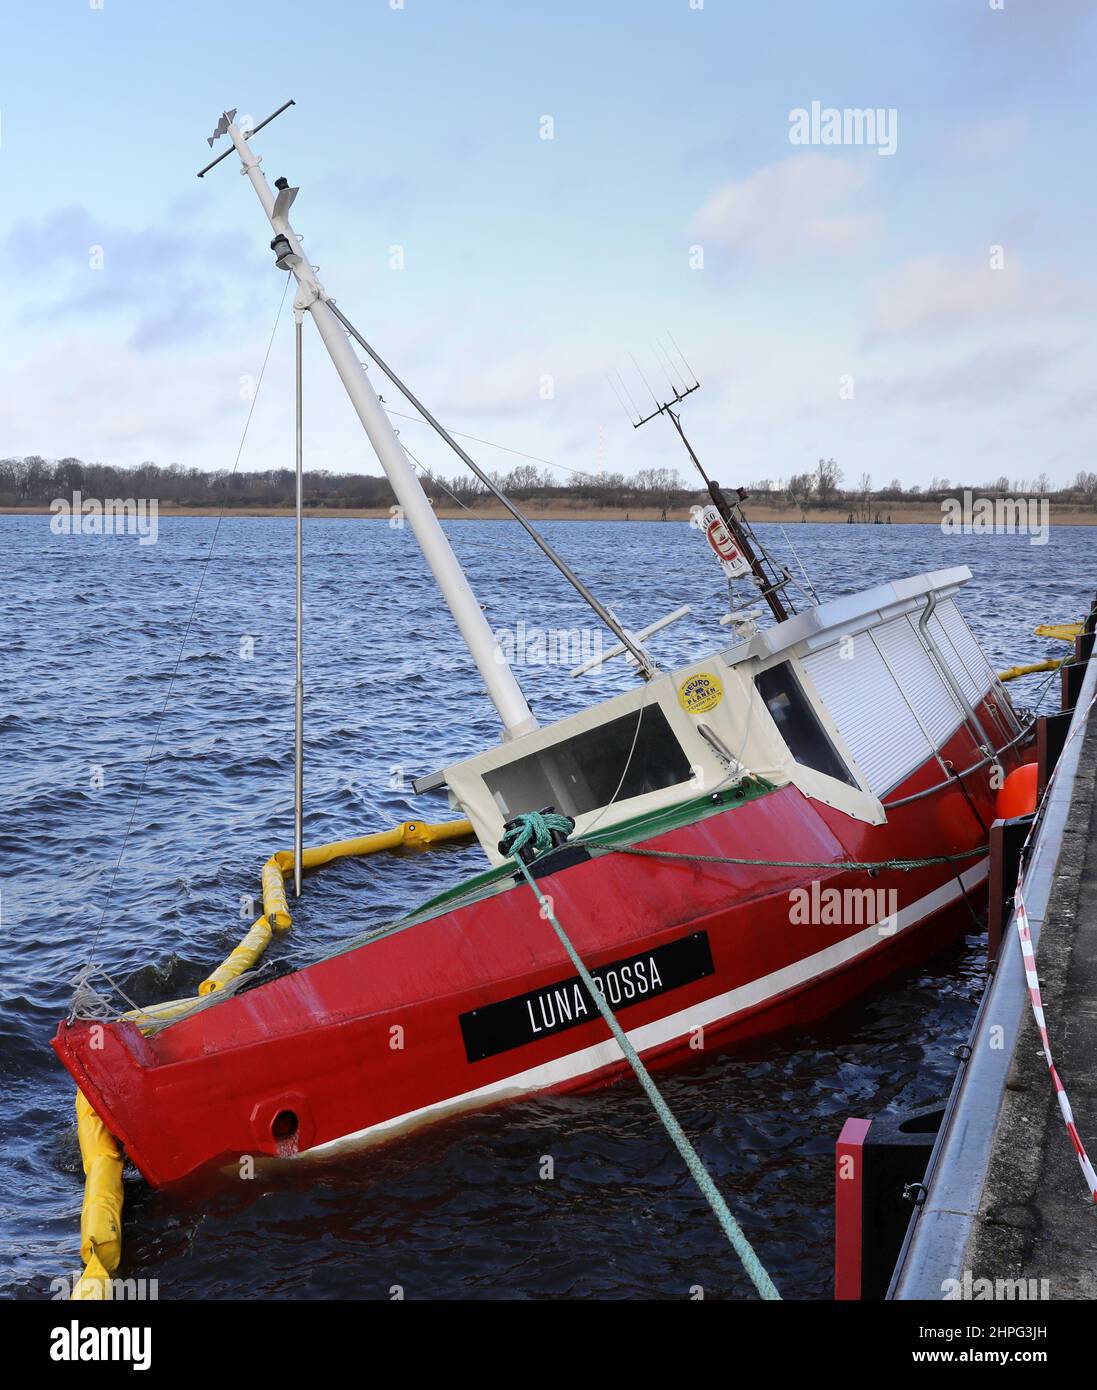 Rostock, Germany. 21st Feb, 2022. The fishing vessel 'Luna Rossa' sank to the bottom of the city harbor during the storm 'Antonia'. 'Antonia' ended the series of severe storms over large parts of Germany. Credit: Bernd Wüstneck/dpa-Zentralbild/dpa/Alamy Live News Stock Photo